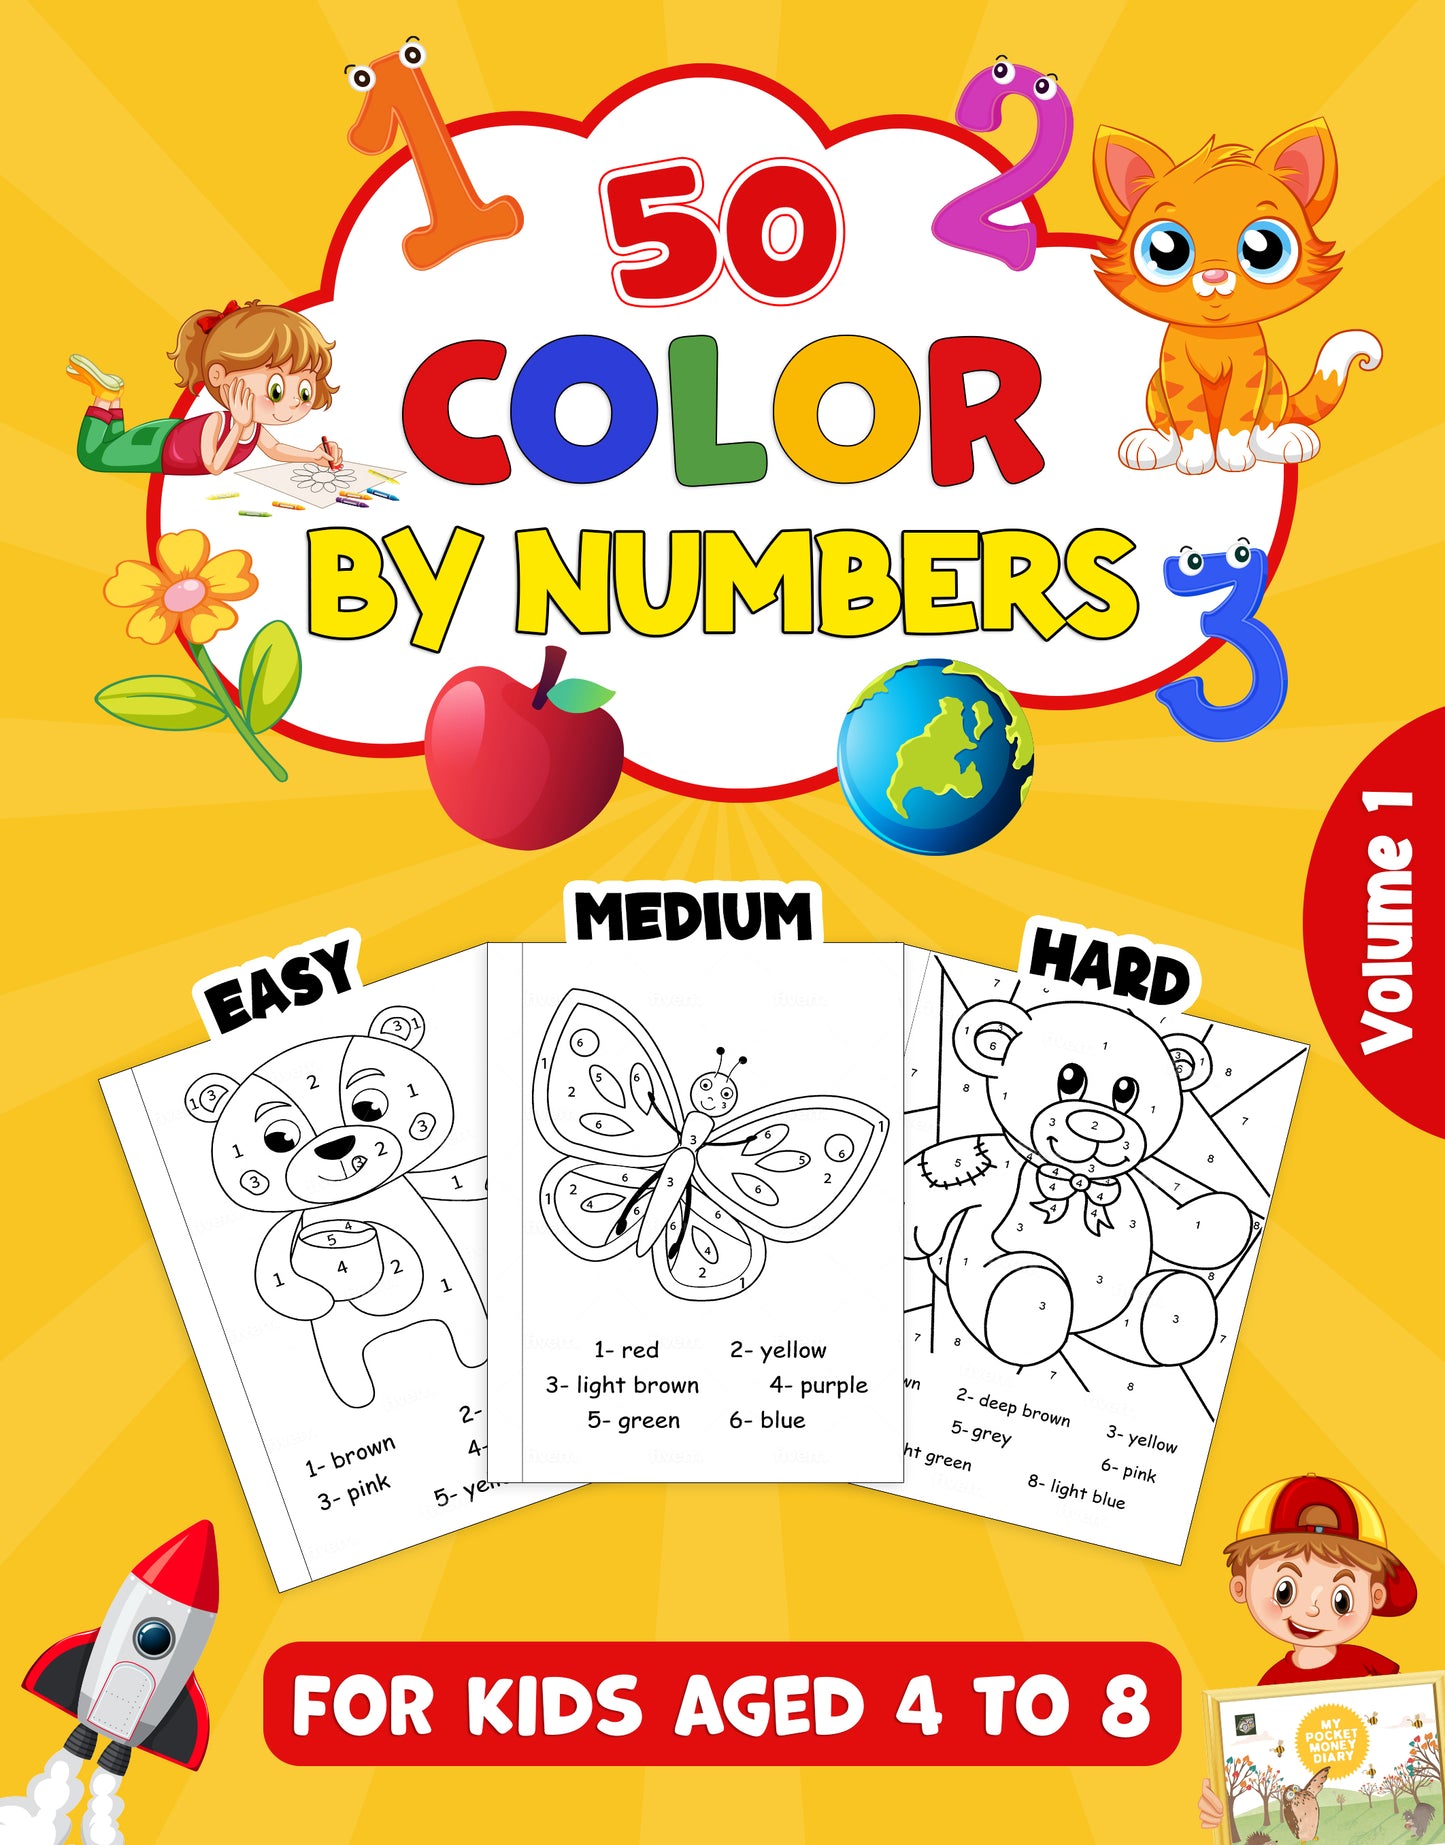 Color-By-Number (Volume 1)